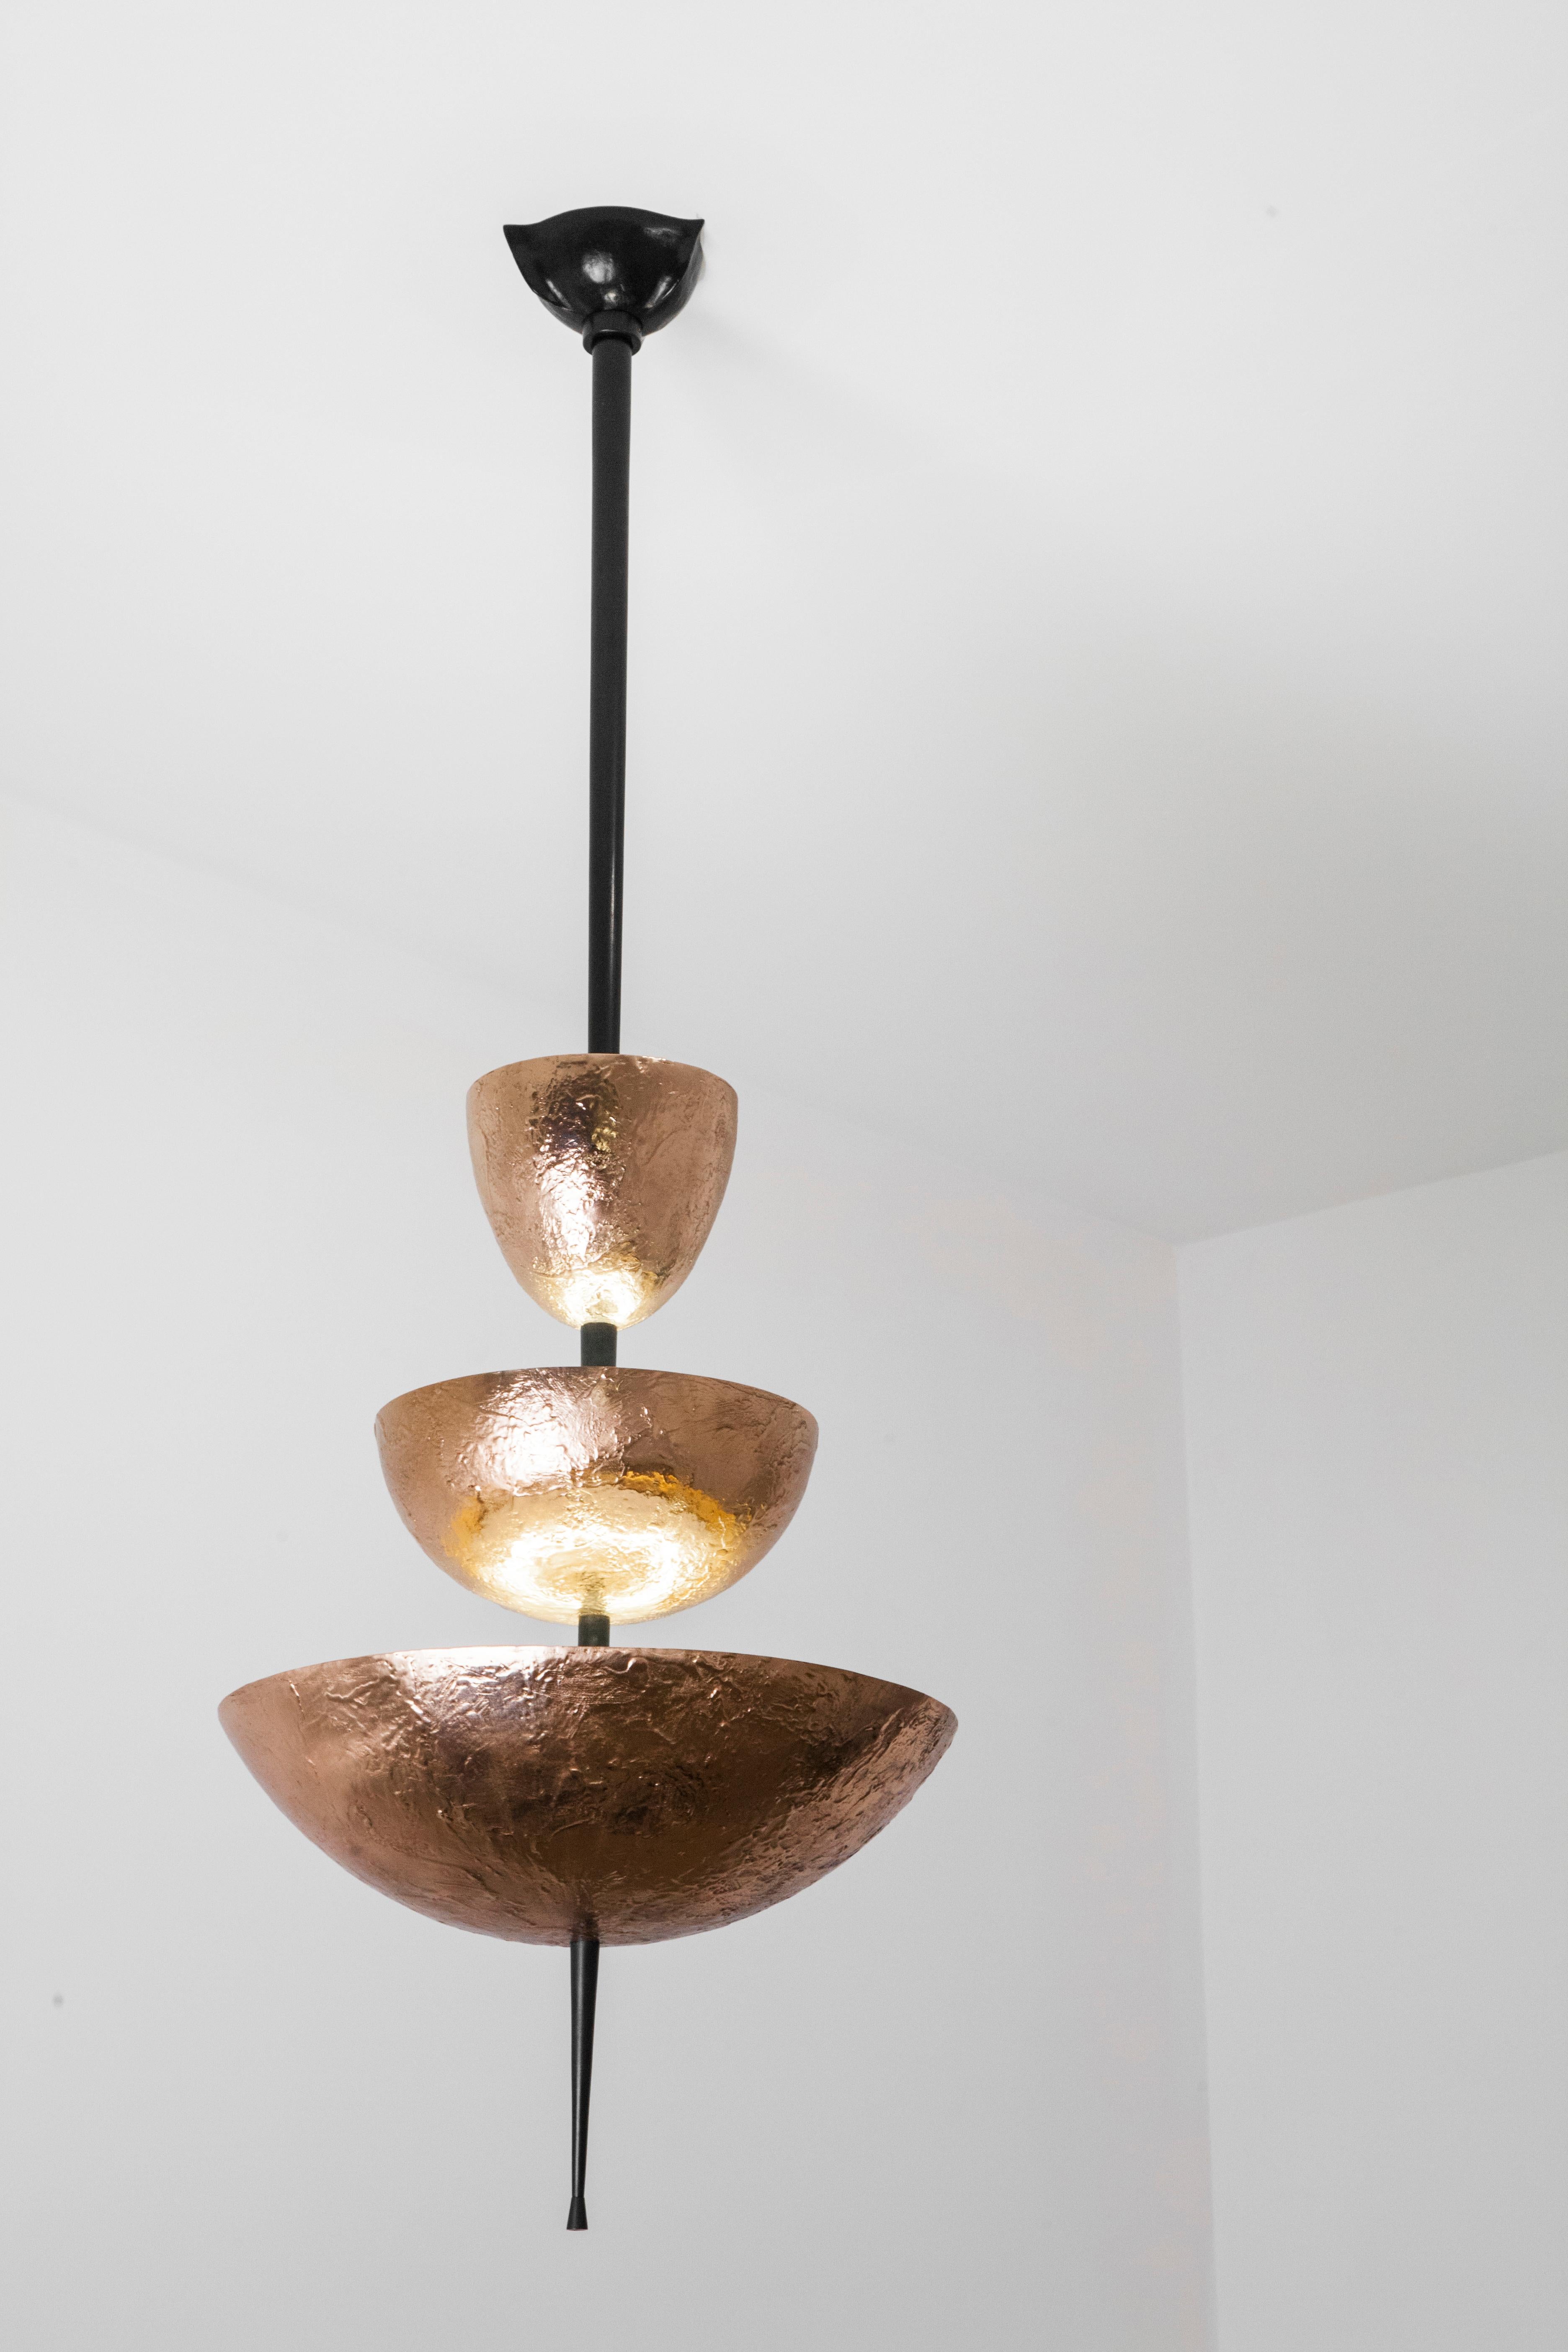 Achille Salvagni
Simposio chandelier
2017
Cast bronze chandelier with a natural finish and burnished bronze stem. This chandelier is named after Plato's Symposium, a praise to Eros, God of Love and Desire, and its unique texture is inspired by an